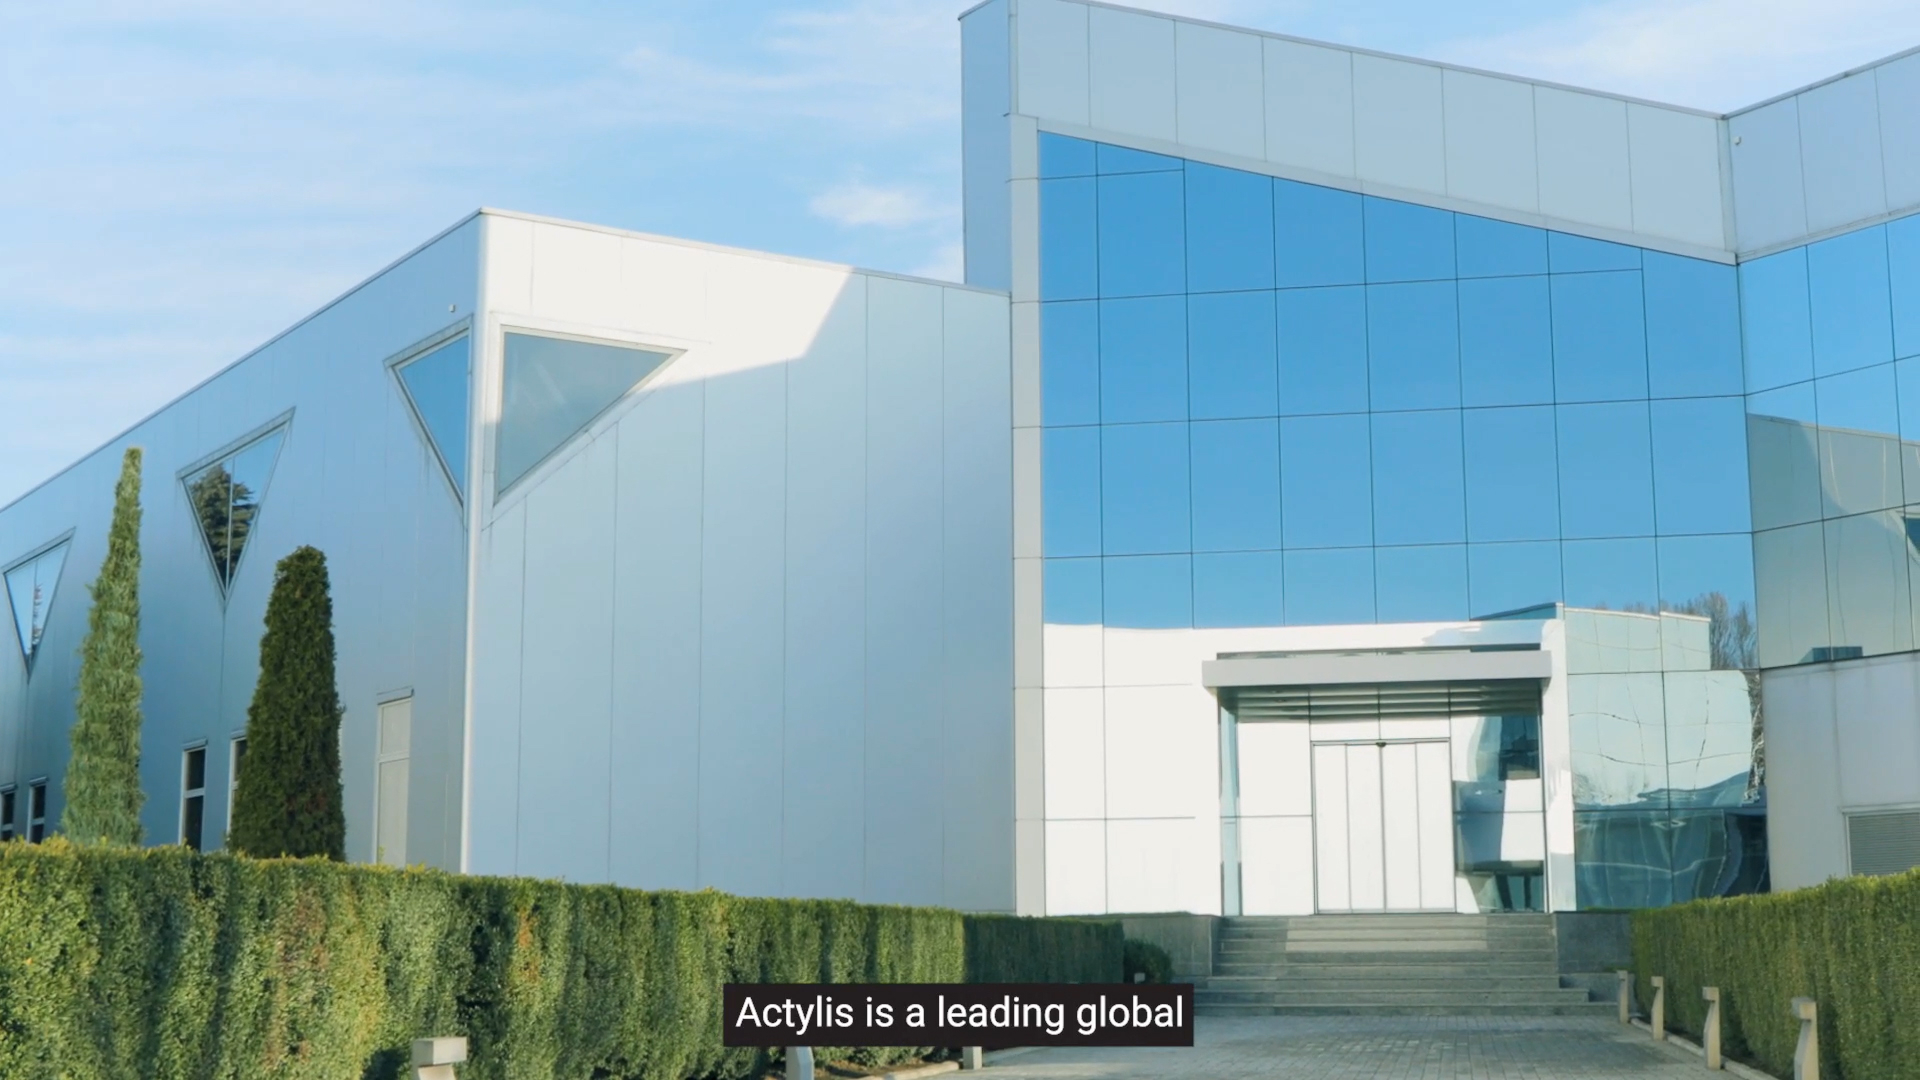 Watch this video to learn more about Actylis, the newly launched integrated global specialty ingredients manufacturing and sourcing powerhouse.(Photo: Business Wire)